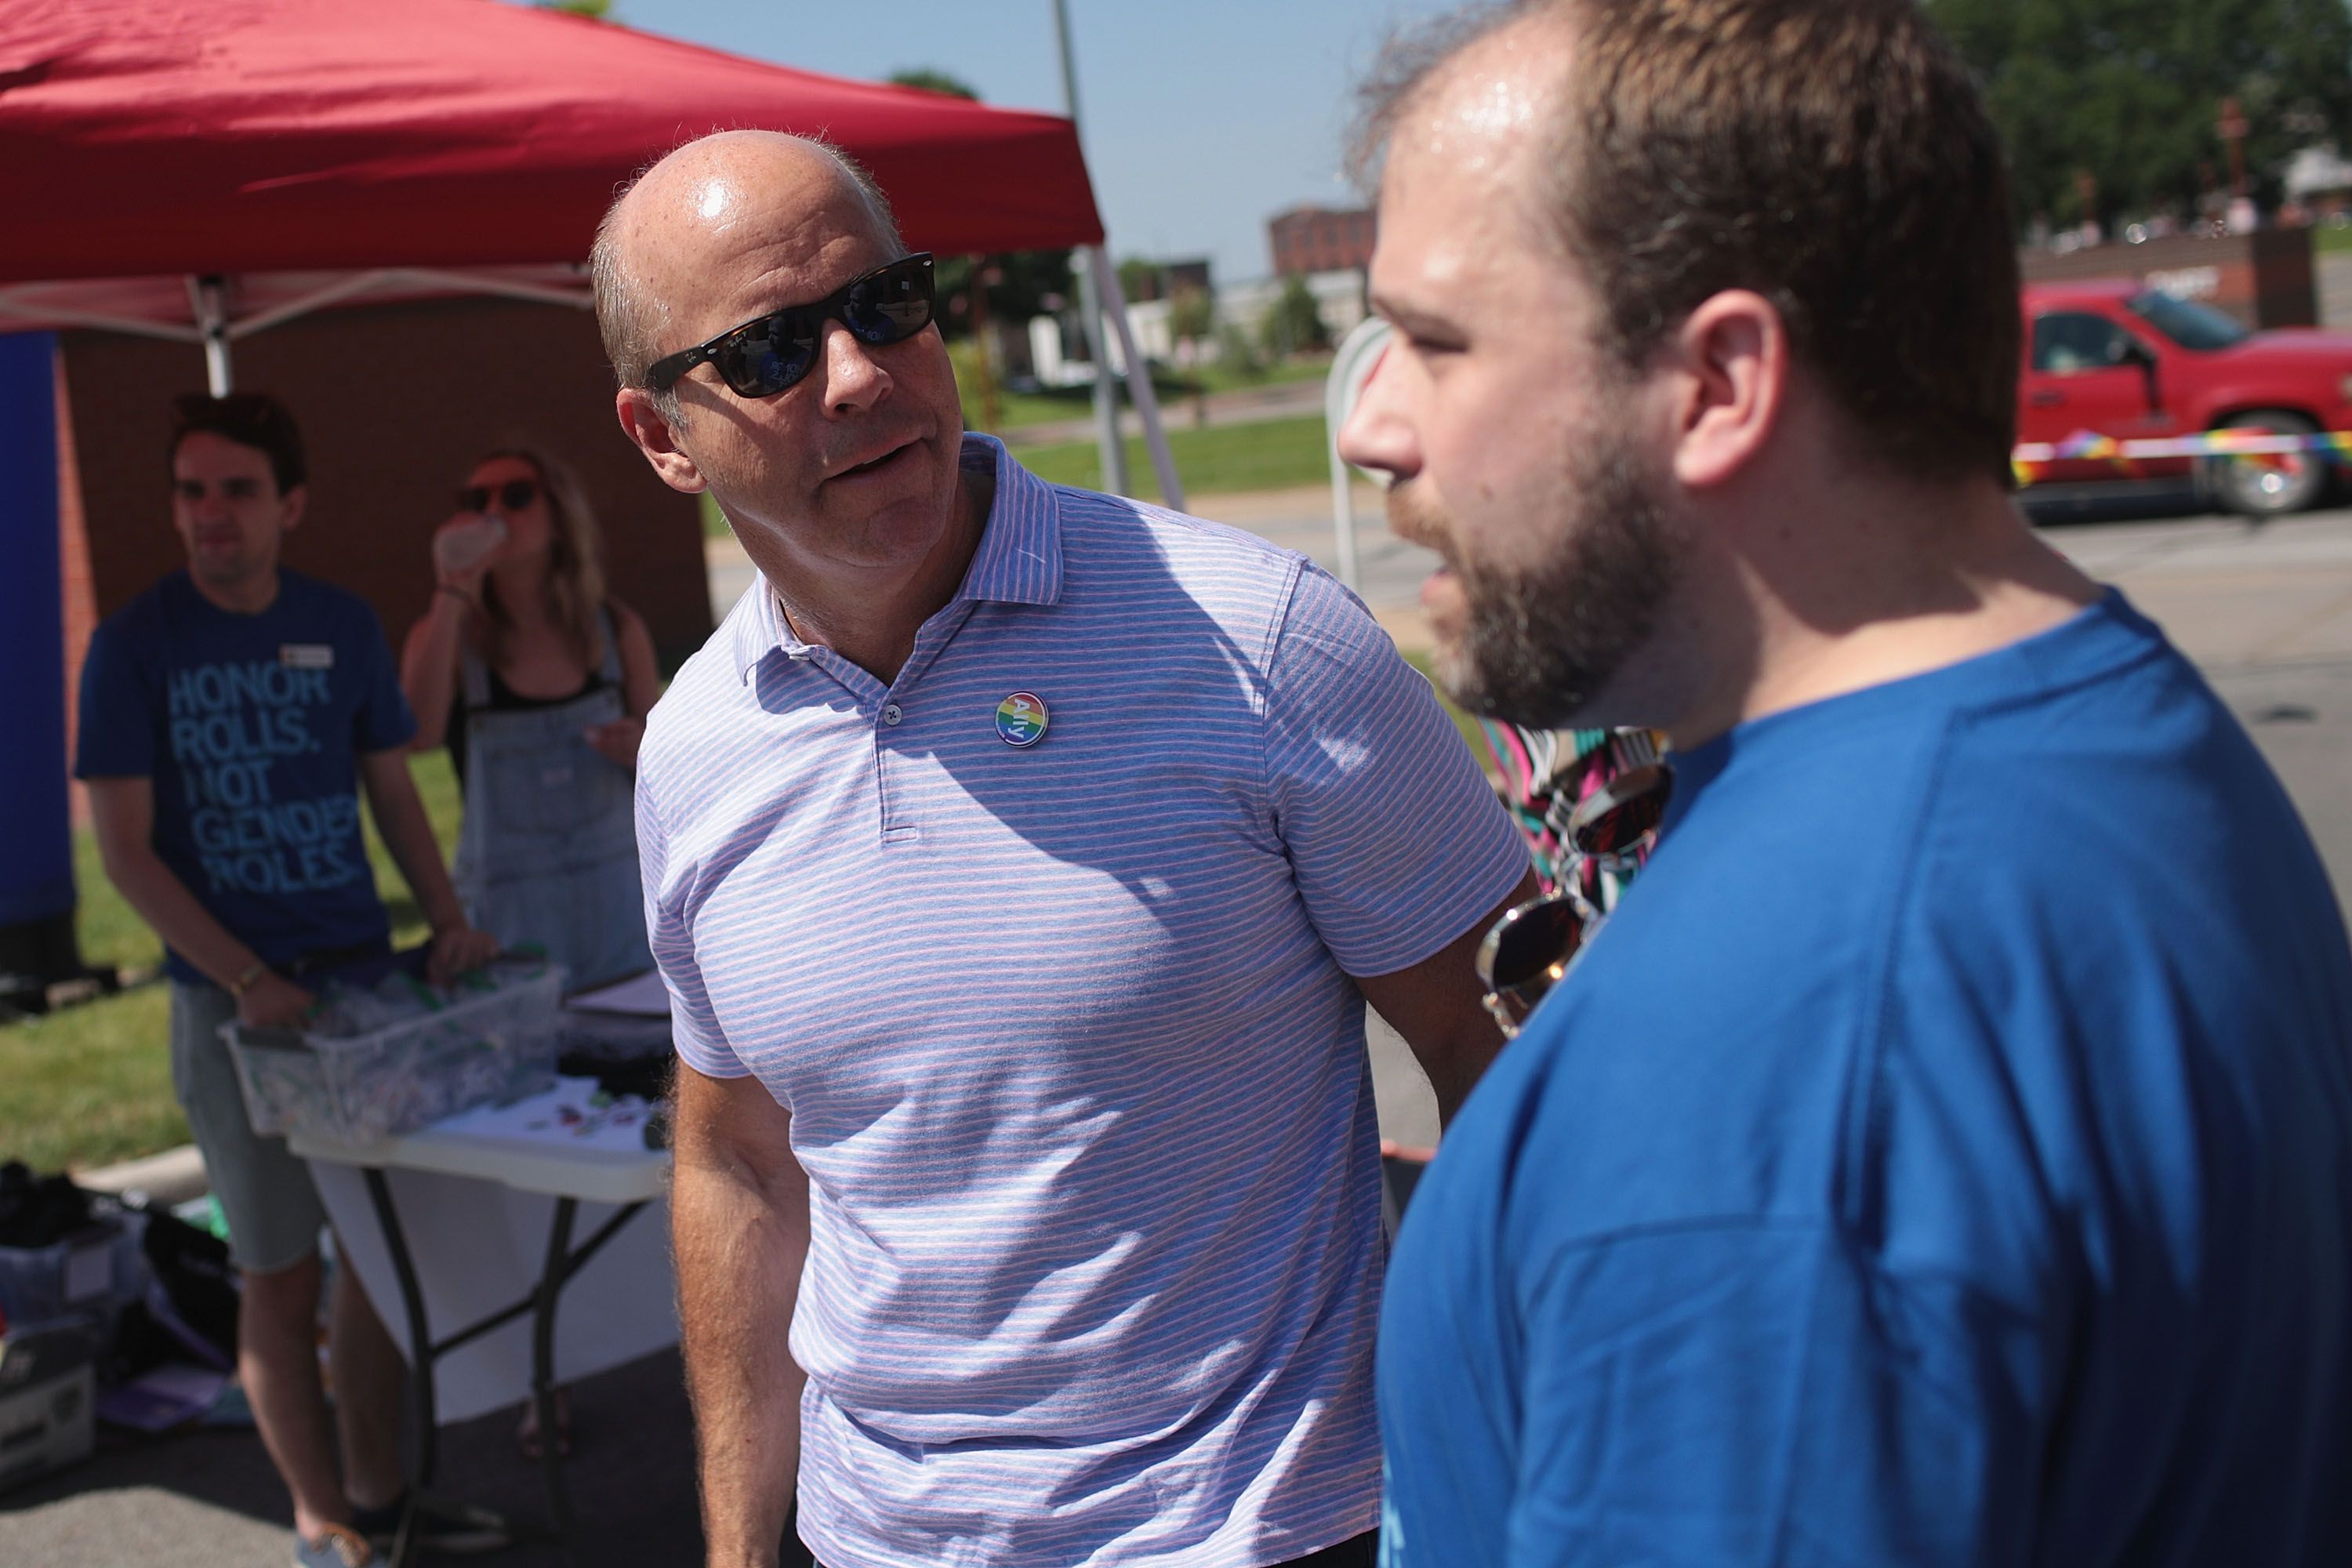 Democratic presidential candidate and former Maryland congressman John Delaney greets people while campaigning at the Capital City Pride Fest on June 08, 2019 in Des Moines, Iowa. 